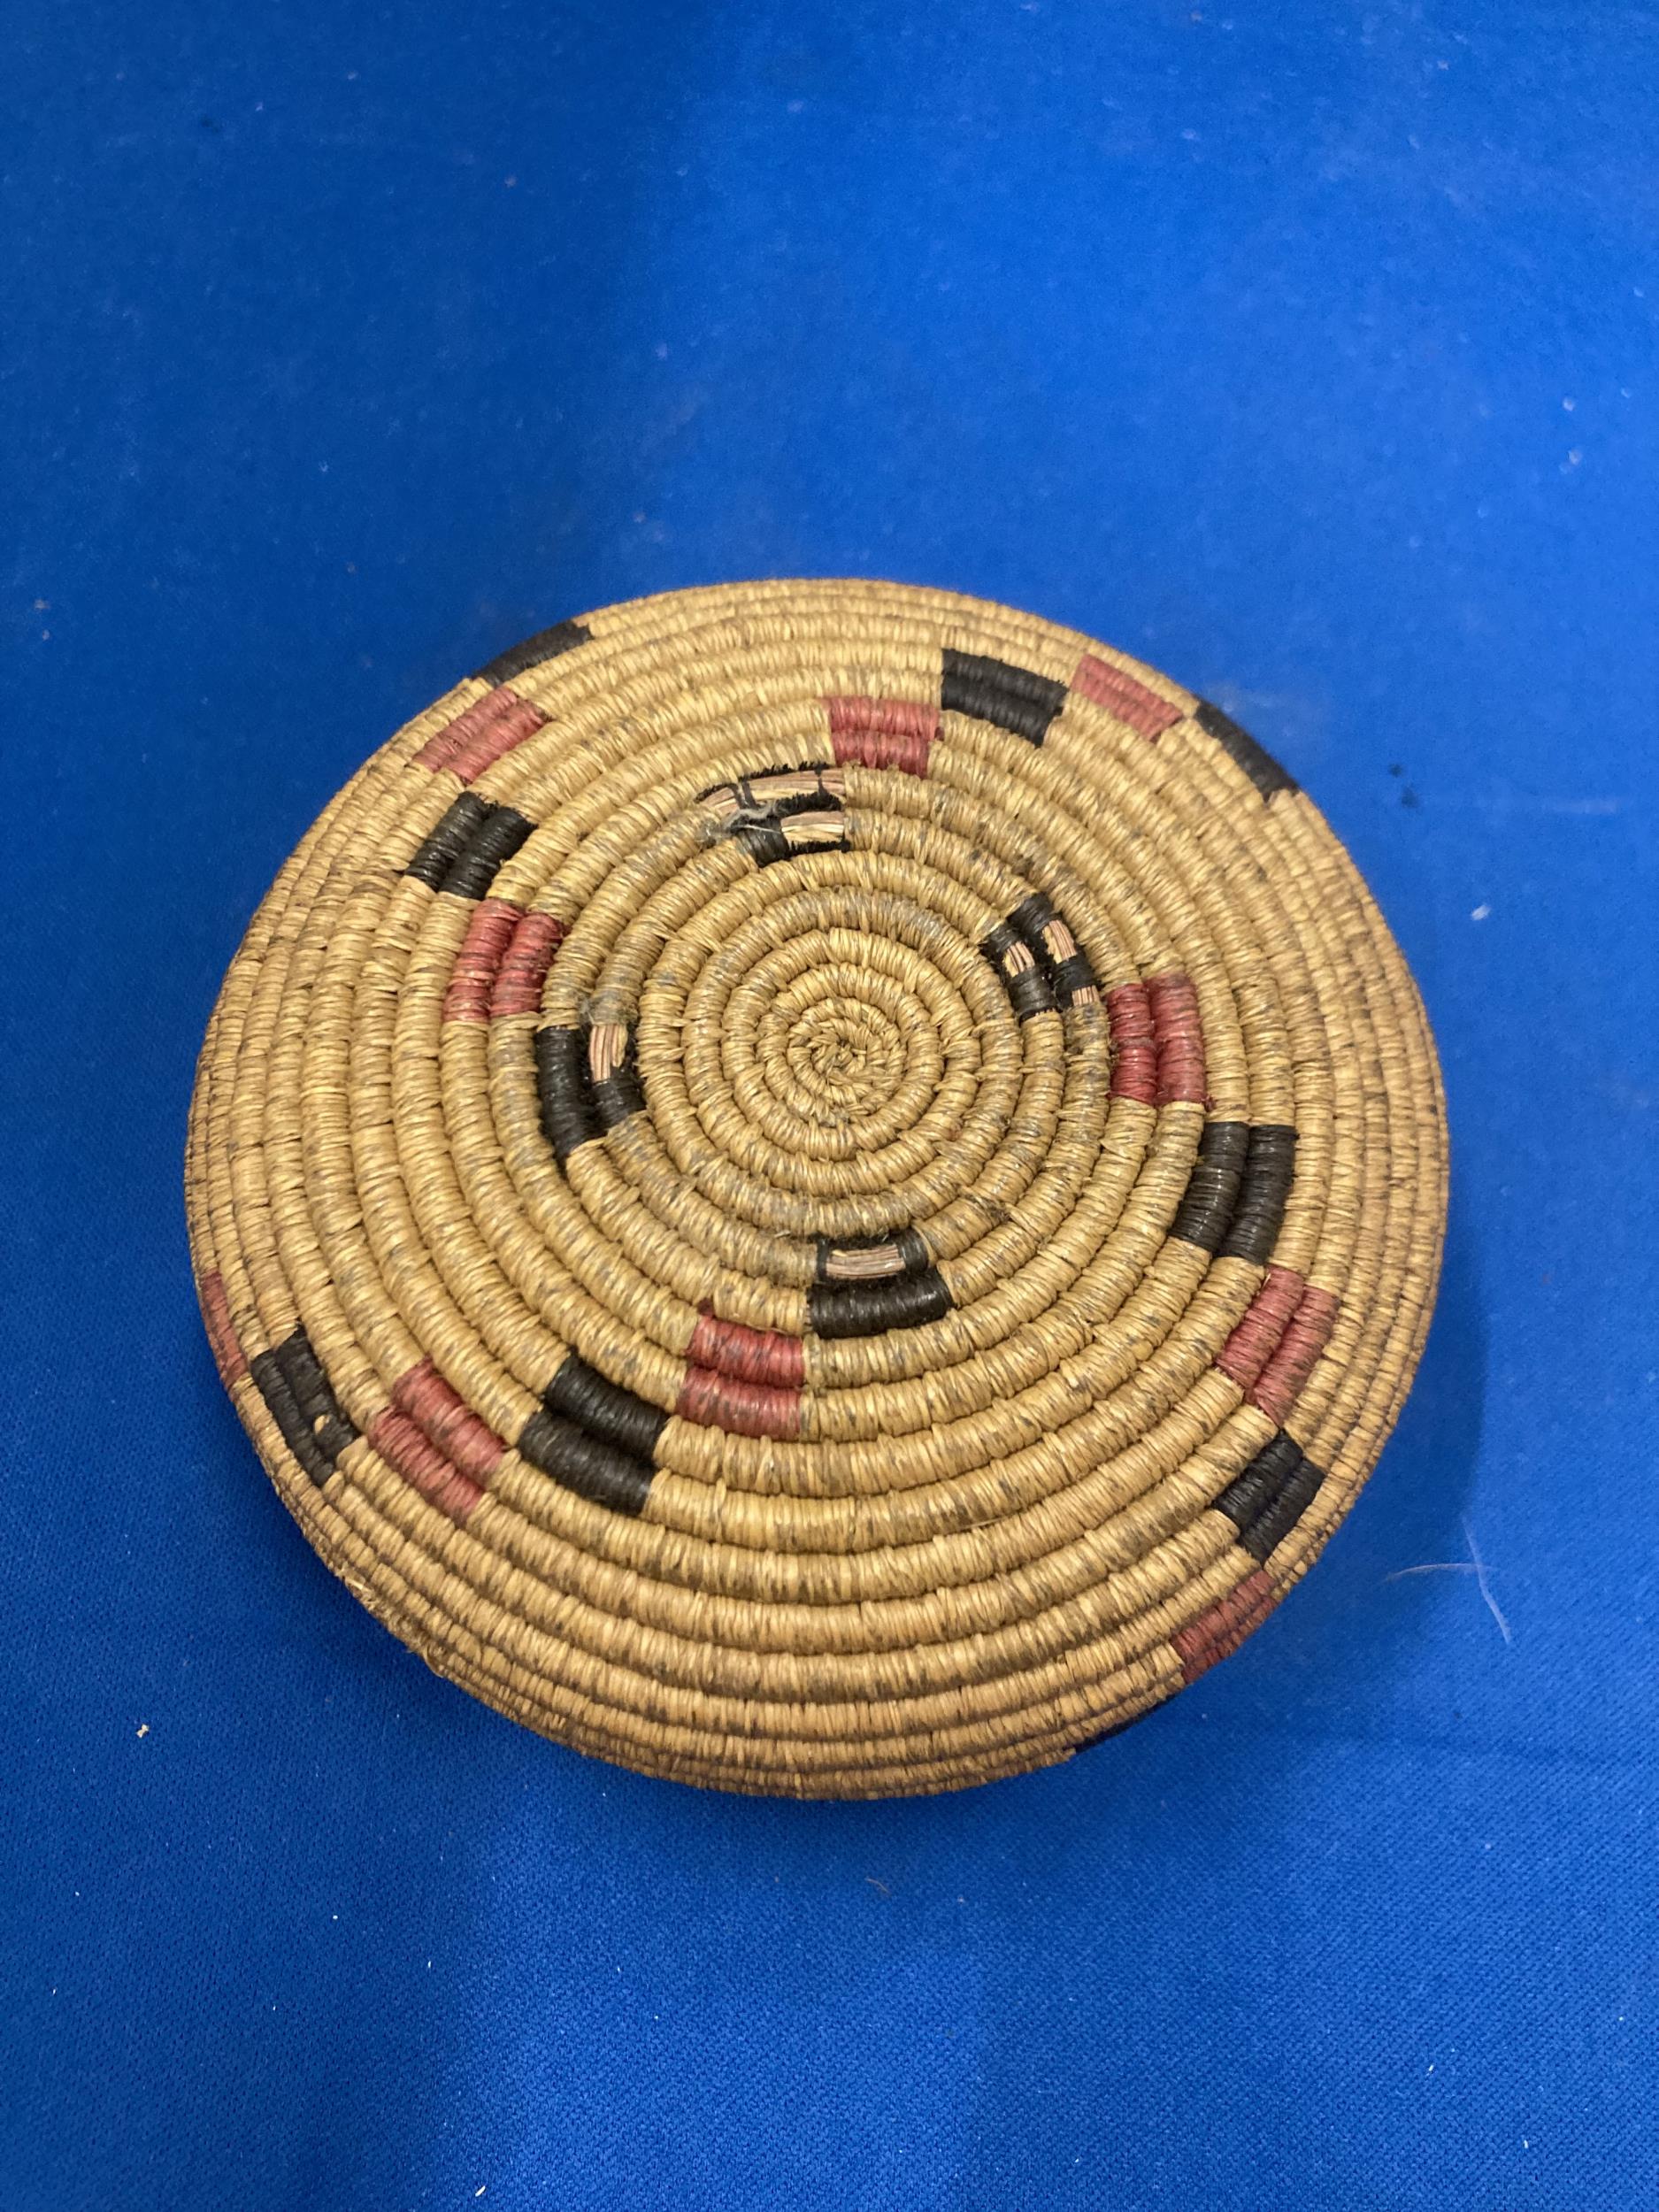 A LATE 19TH/EARLY 20TH CENTURY INDIAN BASKET HEIGHT 6CM - Image 3 of 3